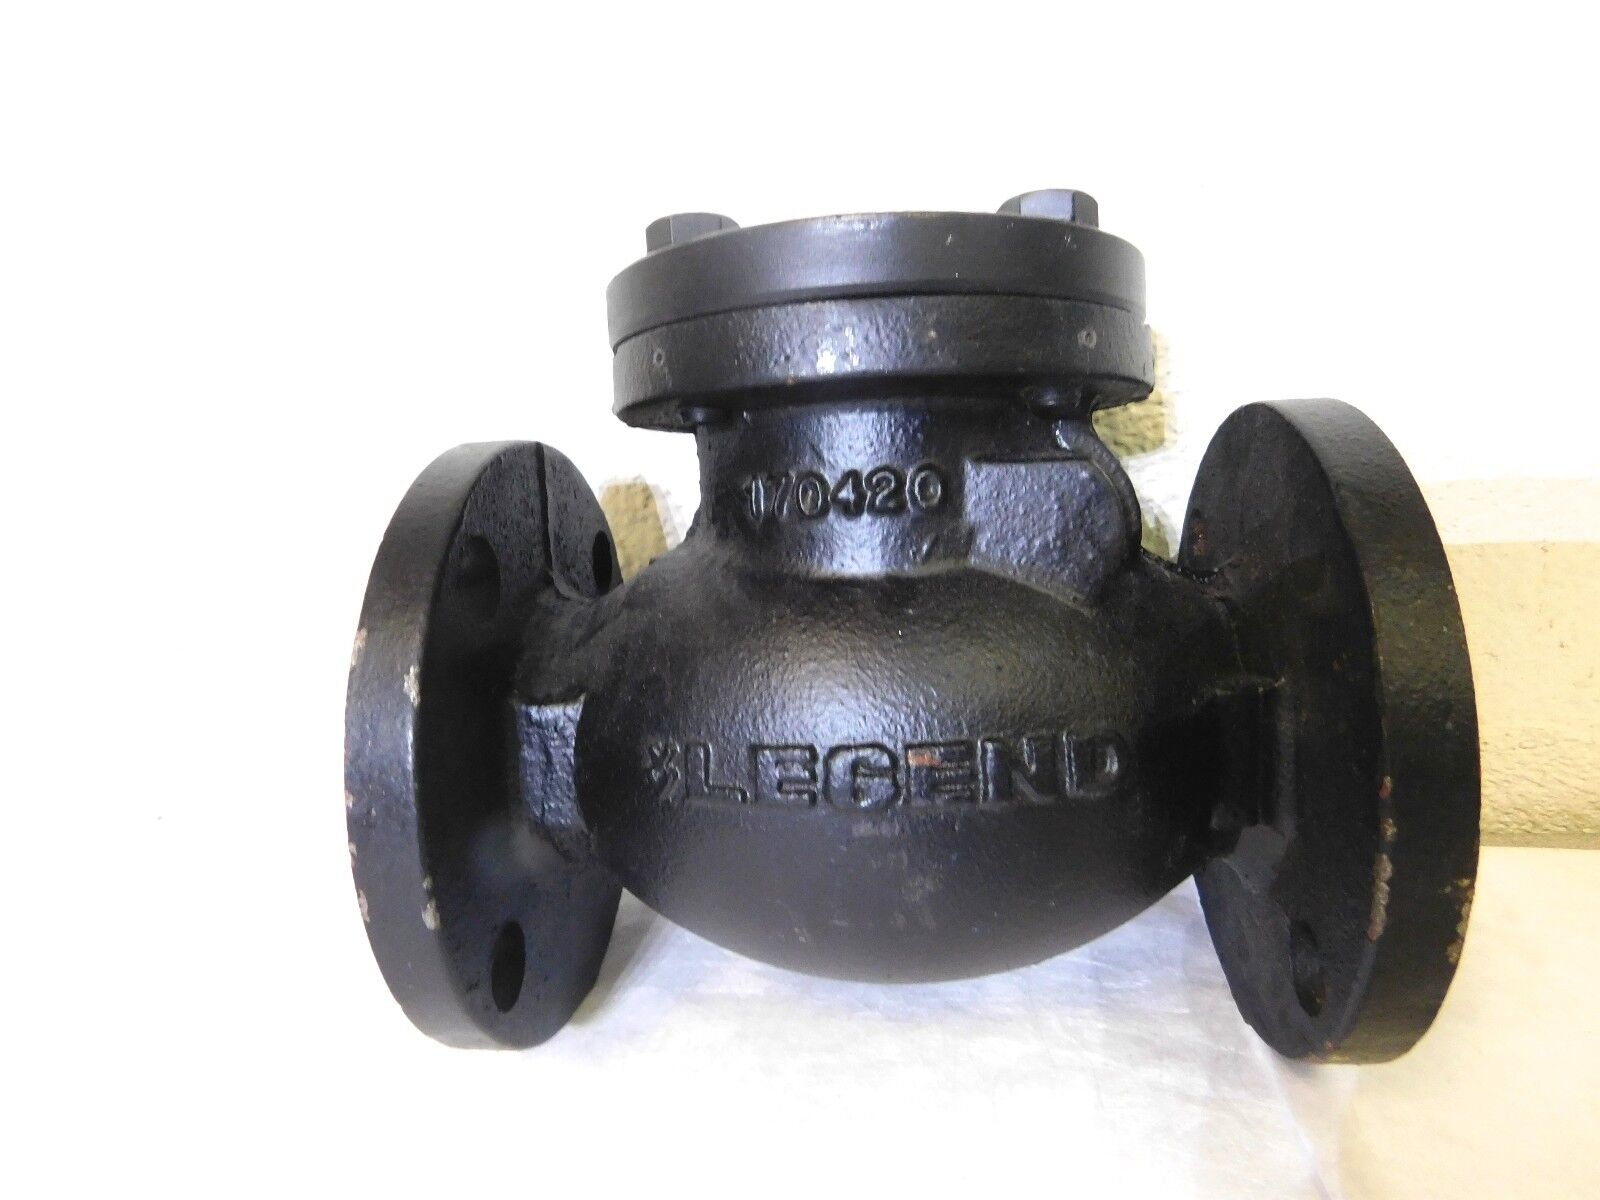 Legend Cast Iron Check Valve Inline Flanged T-311 2 Pipe 7.5X6.2